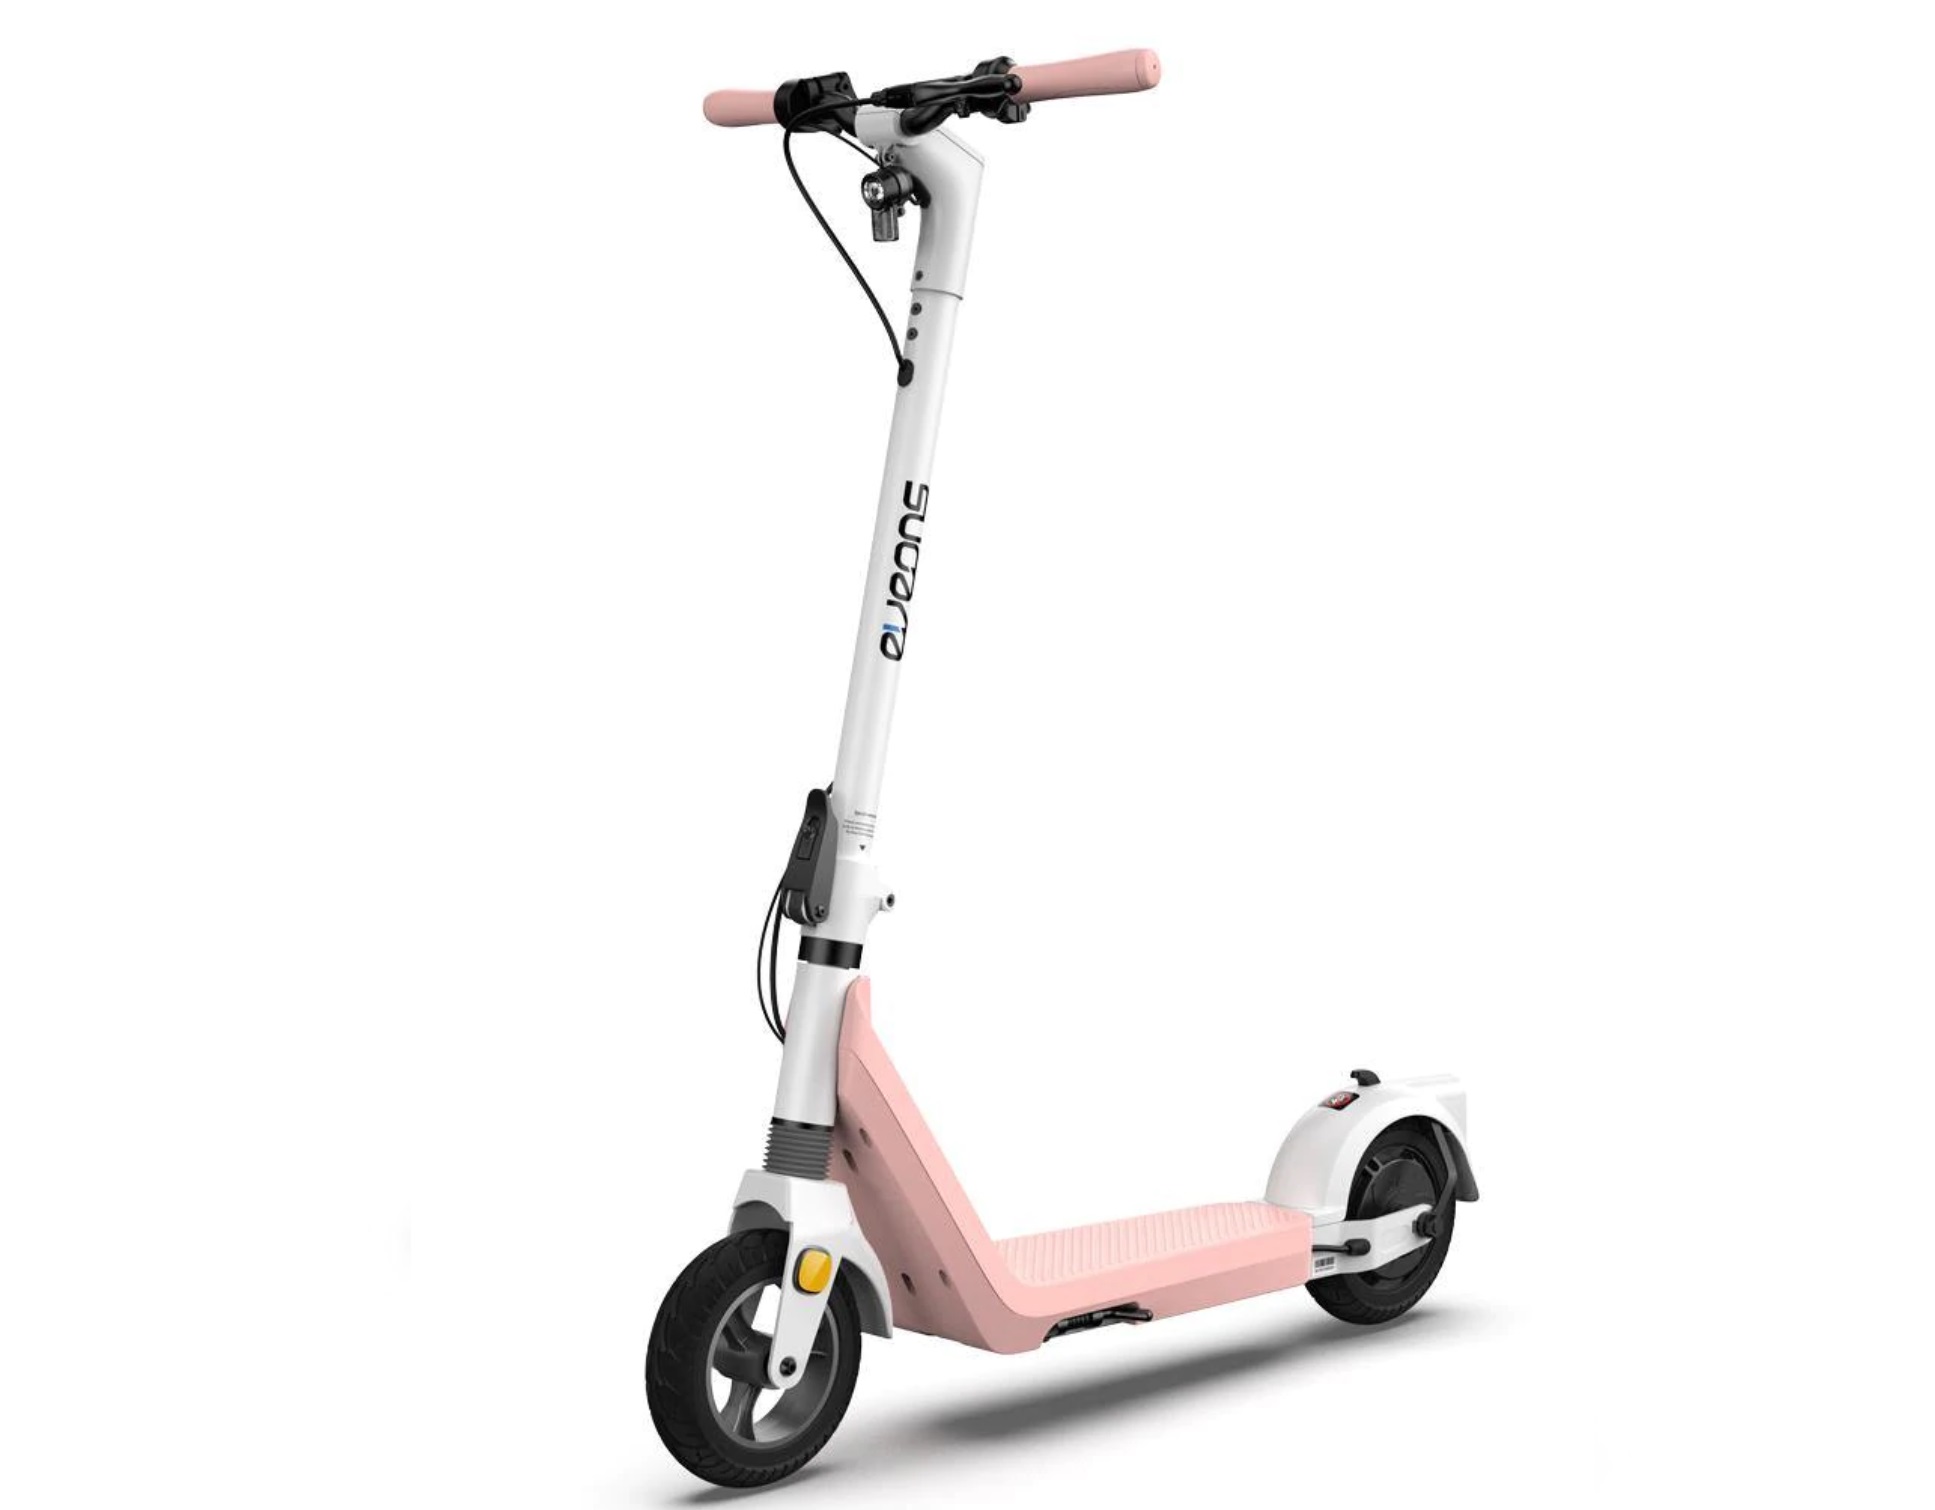 Eveons G Glide Electric Scooter 250W Pink and Black in the UAE – 2 YEARS WARRANTY